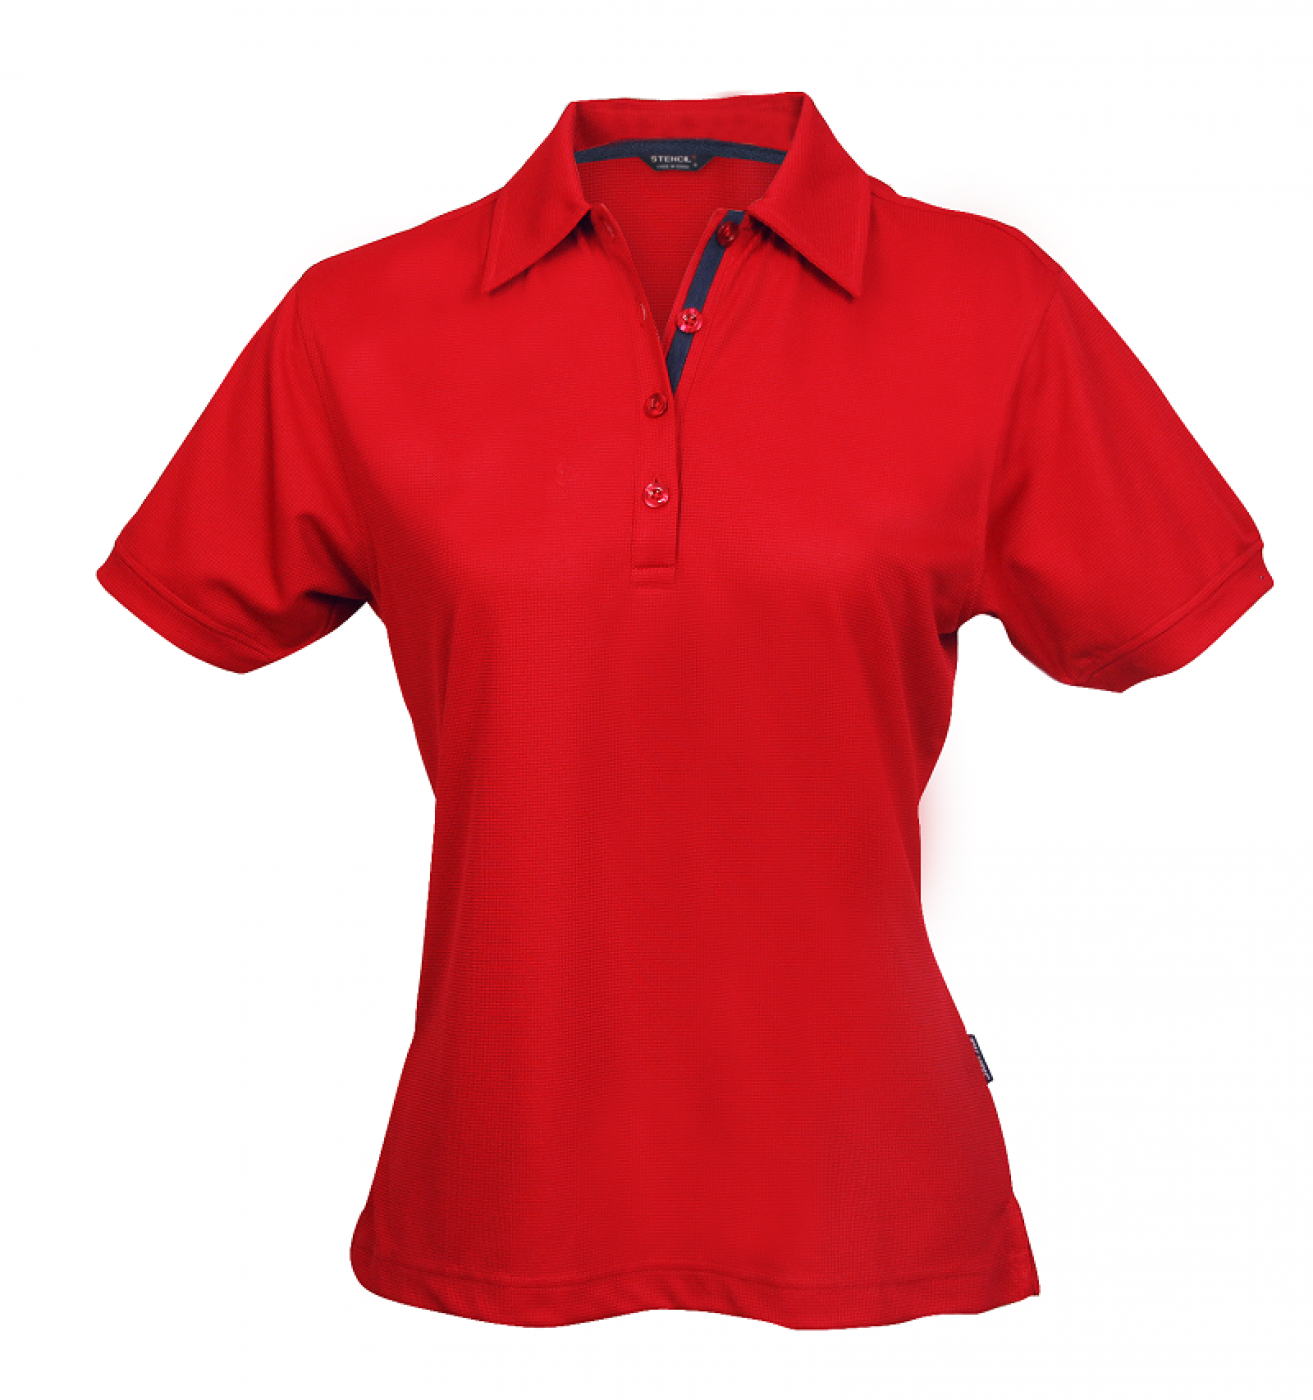 SUPERDRY LADIES S/S POLO - Better Promo